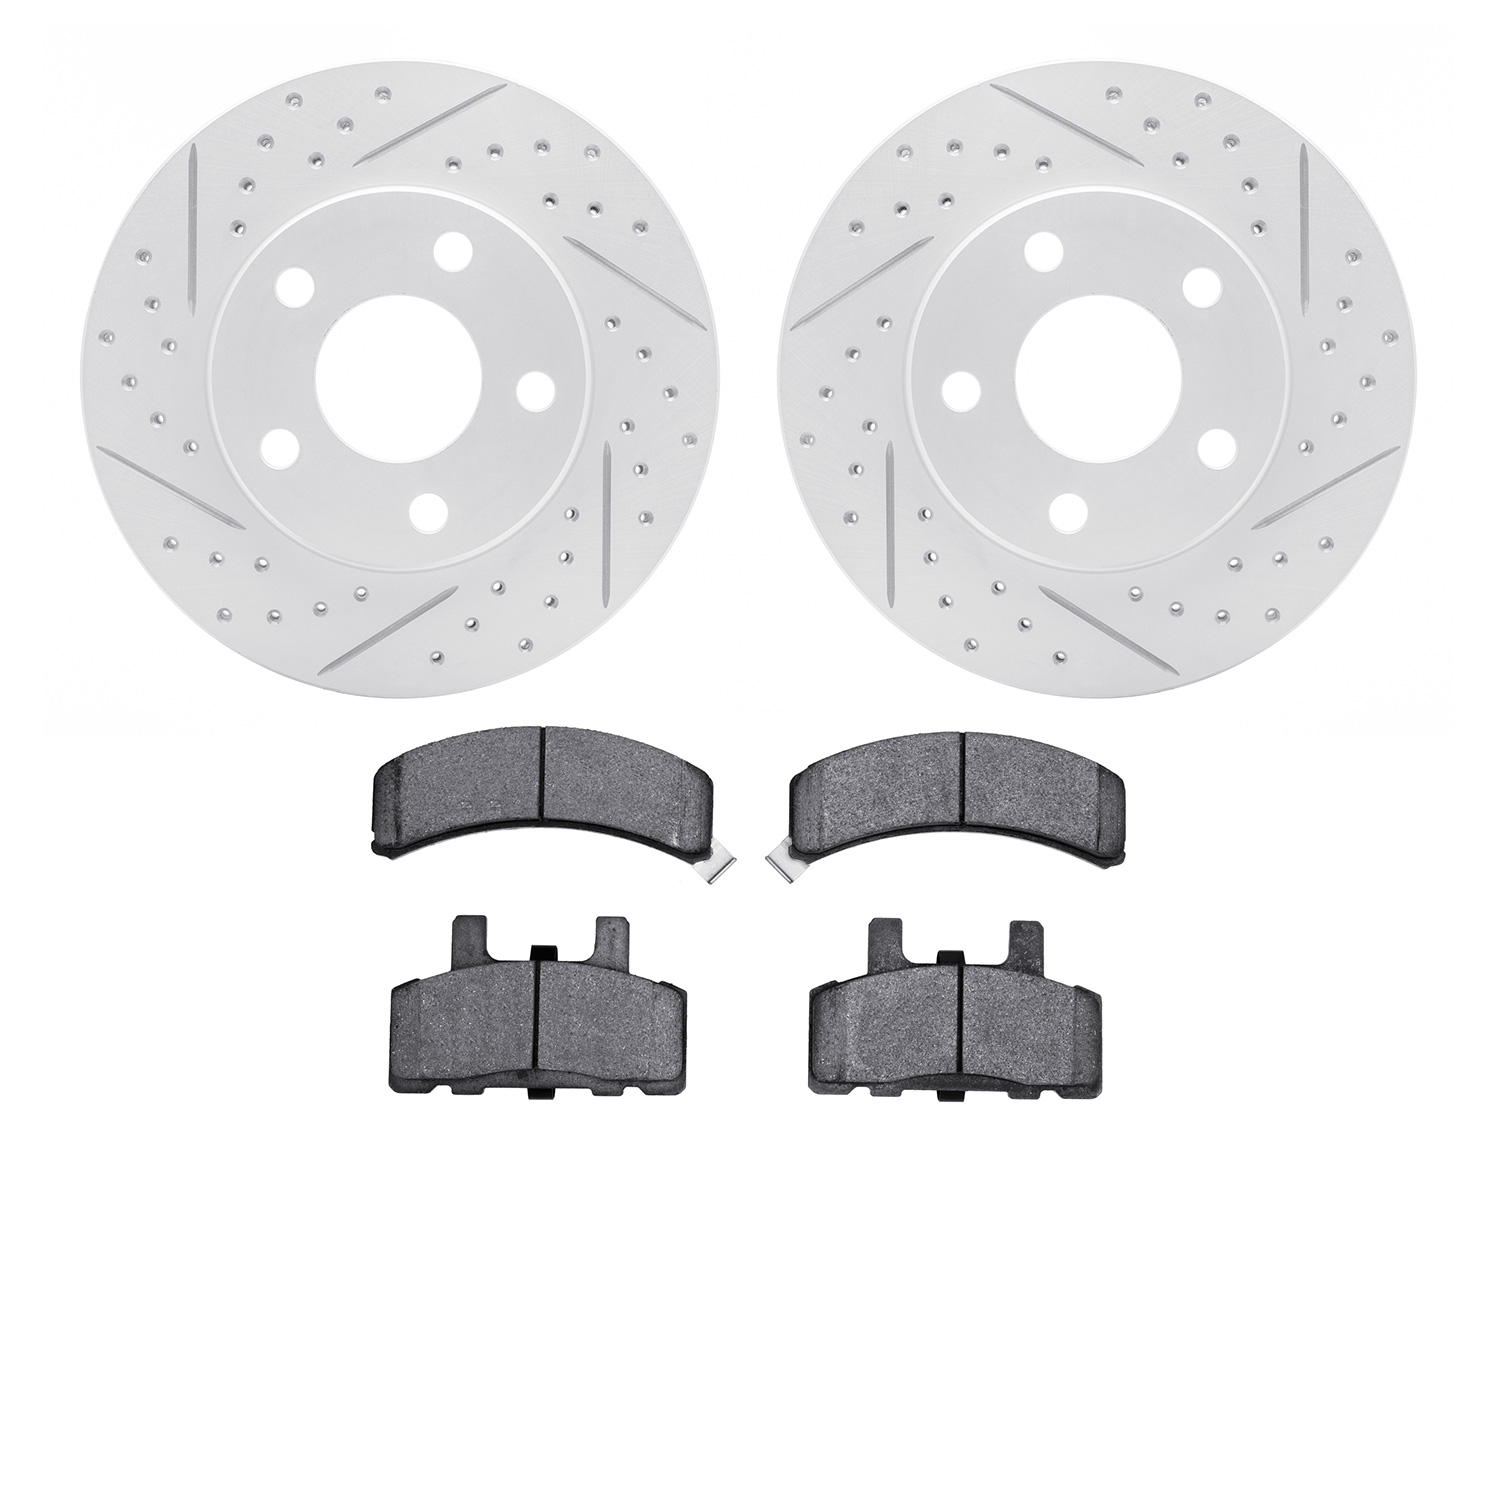 2402-47002 Geoperformance Drilled/Slotted Brake Rotors with Ultimate-Duty Brake Pads Kit, 1990-1993 GM, Position: Front